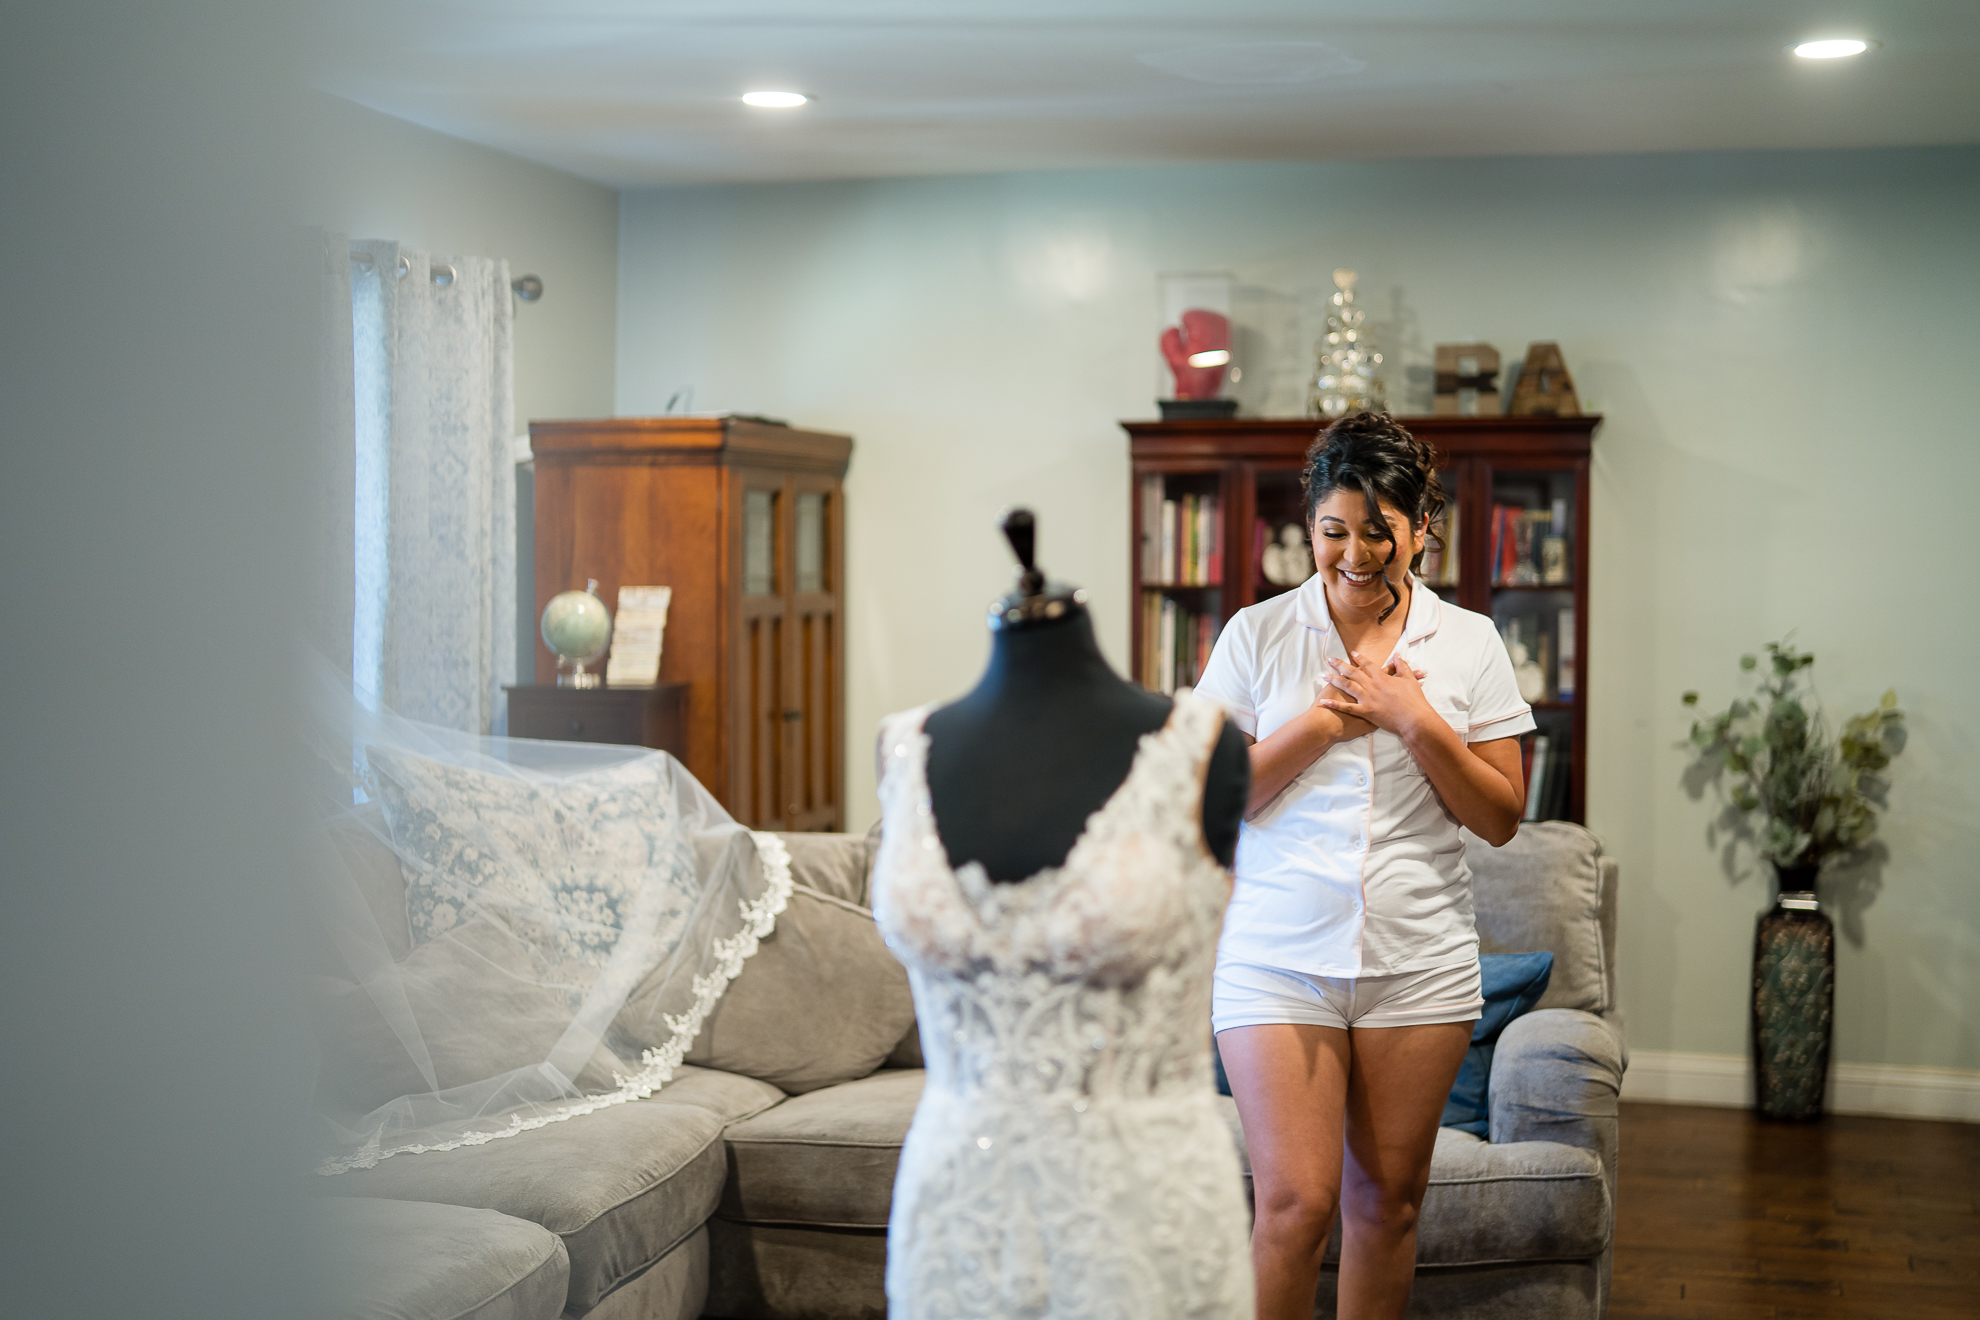 ThomasKim_photography A bride getting ready in a living room.